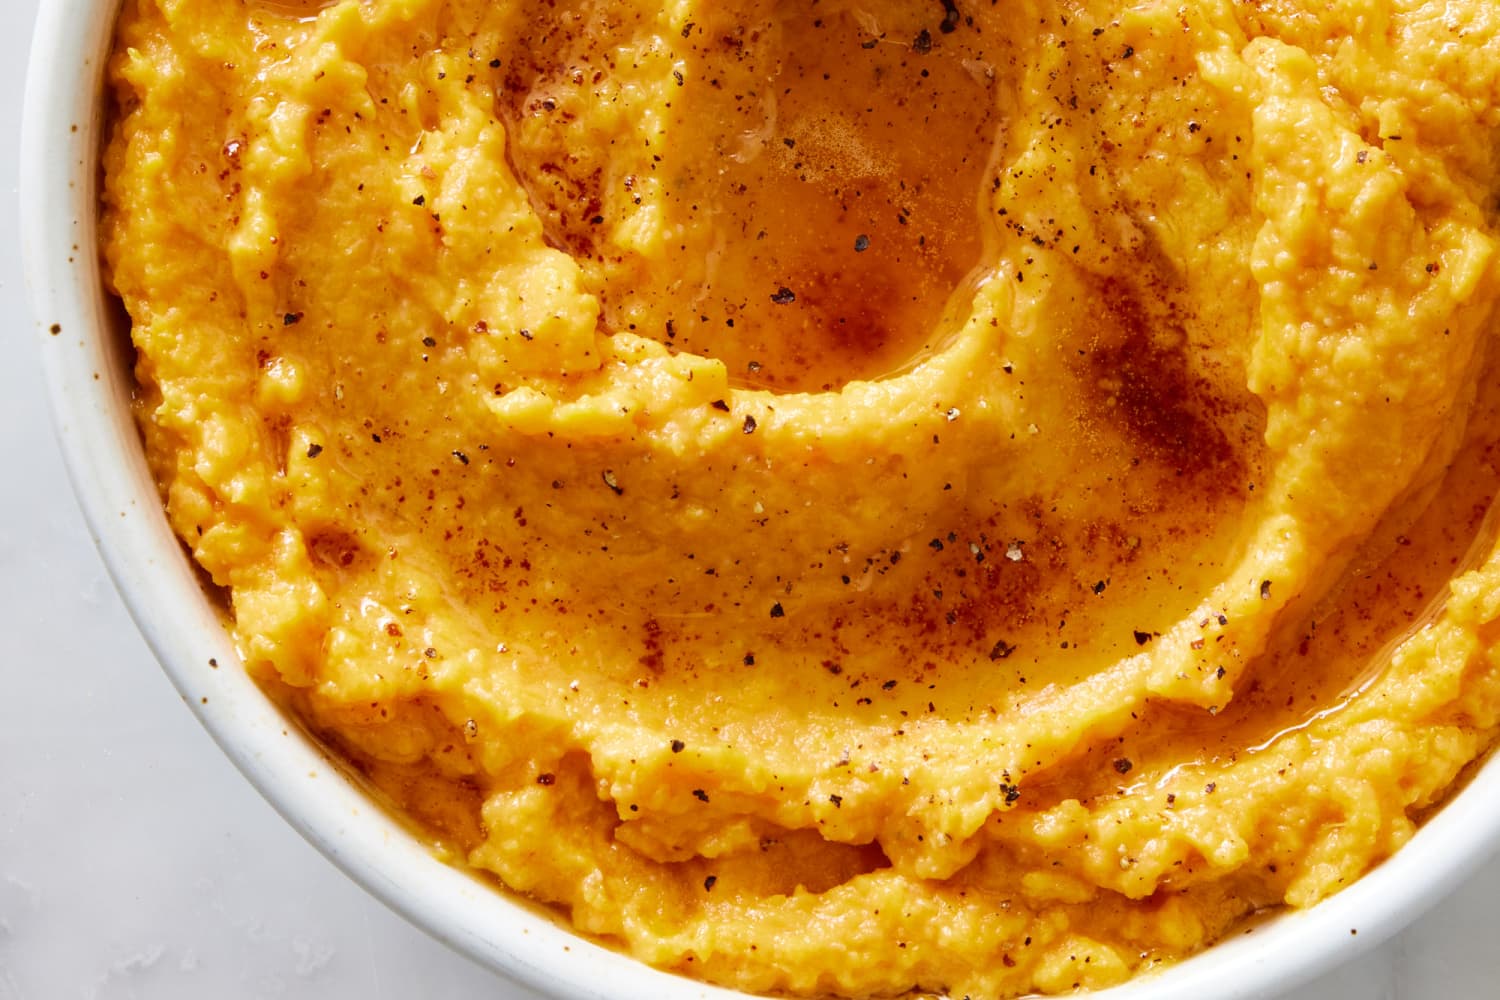 https://cdn.apartmenttherapy.info/image/upload/f_auto,q_auto:eco,c_fill,g_auto,w_1500,ar_3:2/k%2FPhoto%2FRecipes%2F2023-10-brown-butter-mashed-sweet-potato%2Fbrown-butter-mashed-sweet-potato-0038-1